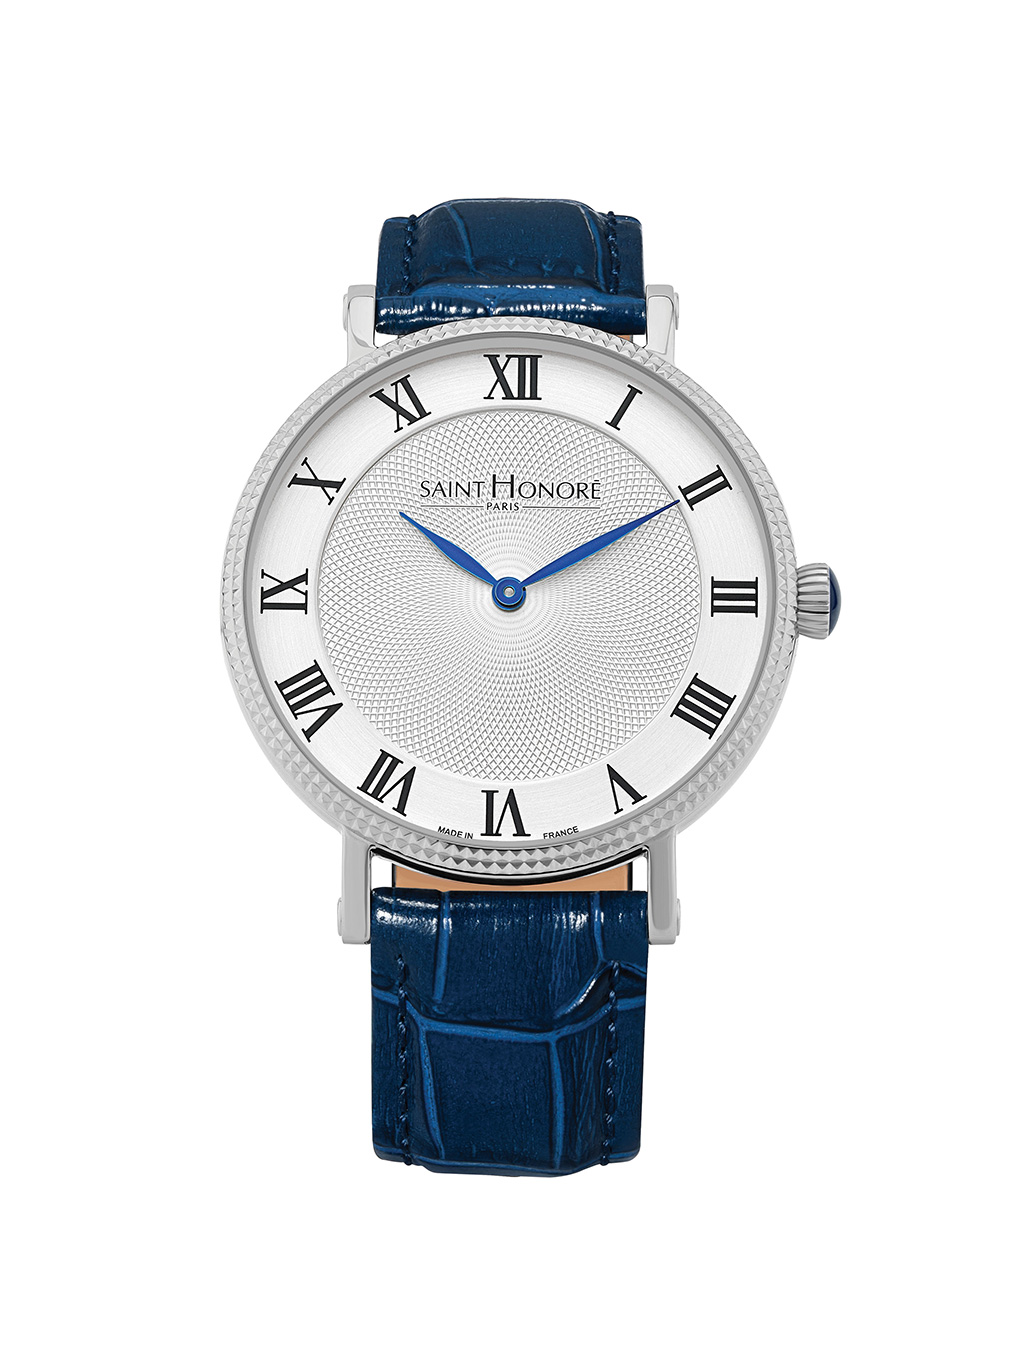 TROCADERO Men's watch - stainless steel case, white dial, blue leather strap